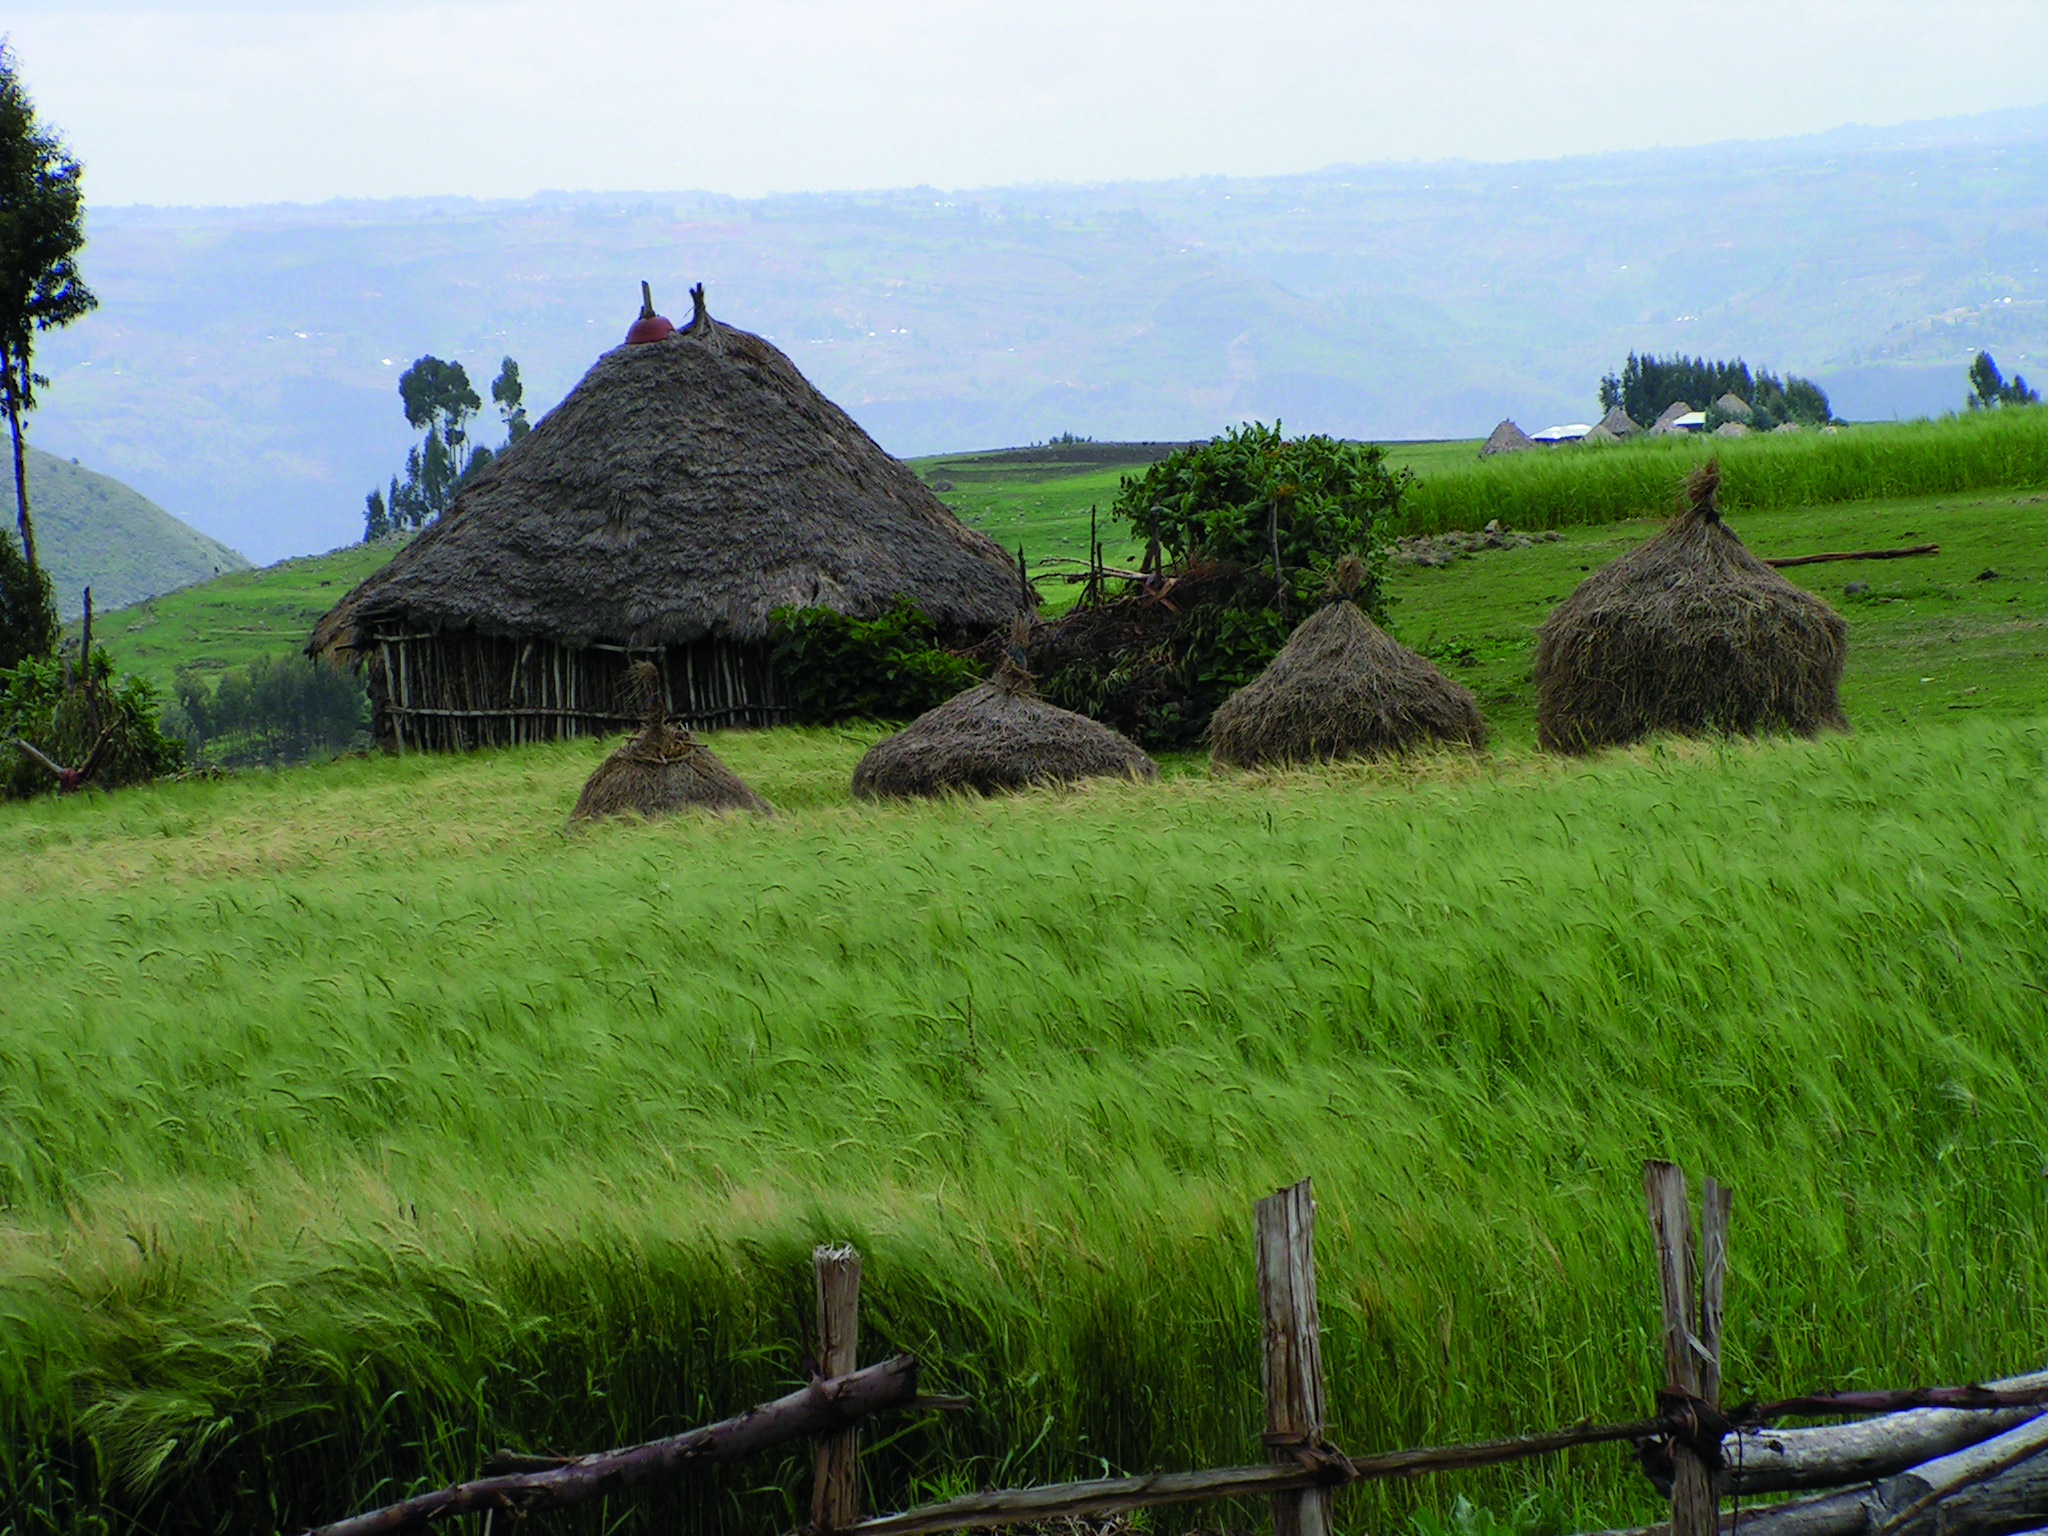 In Ethiopia, smallholder farmers access to high-quality seed is often limited